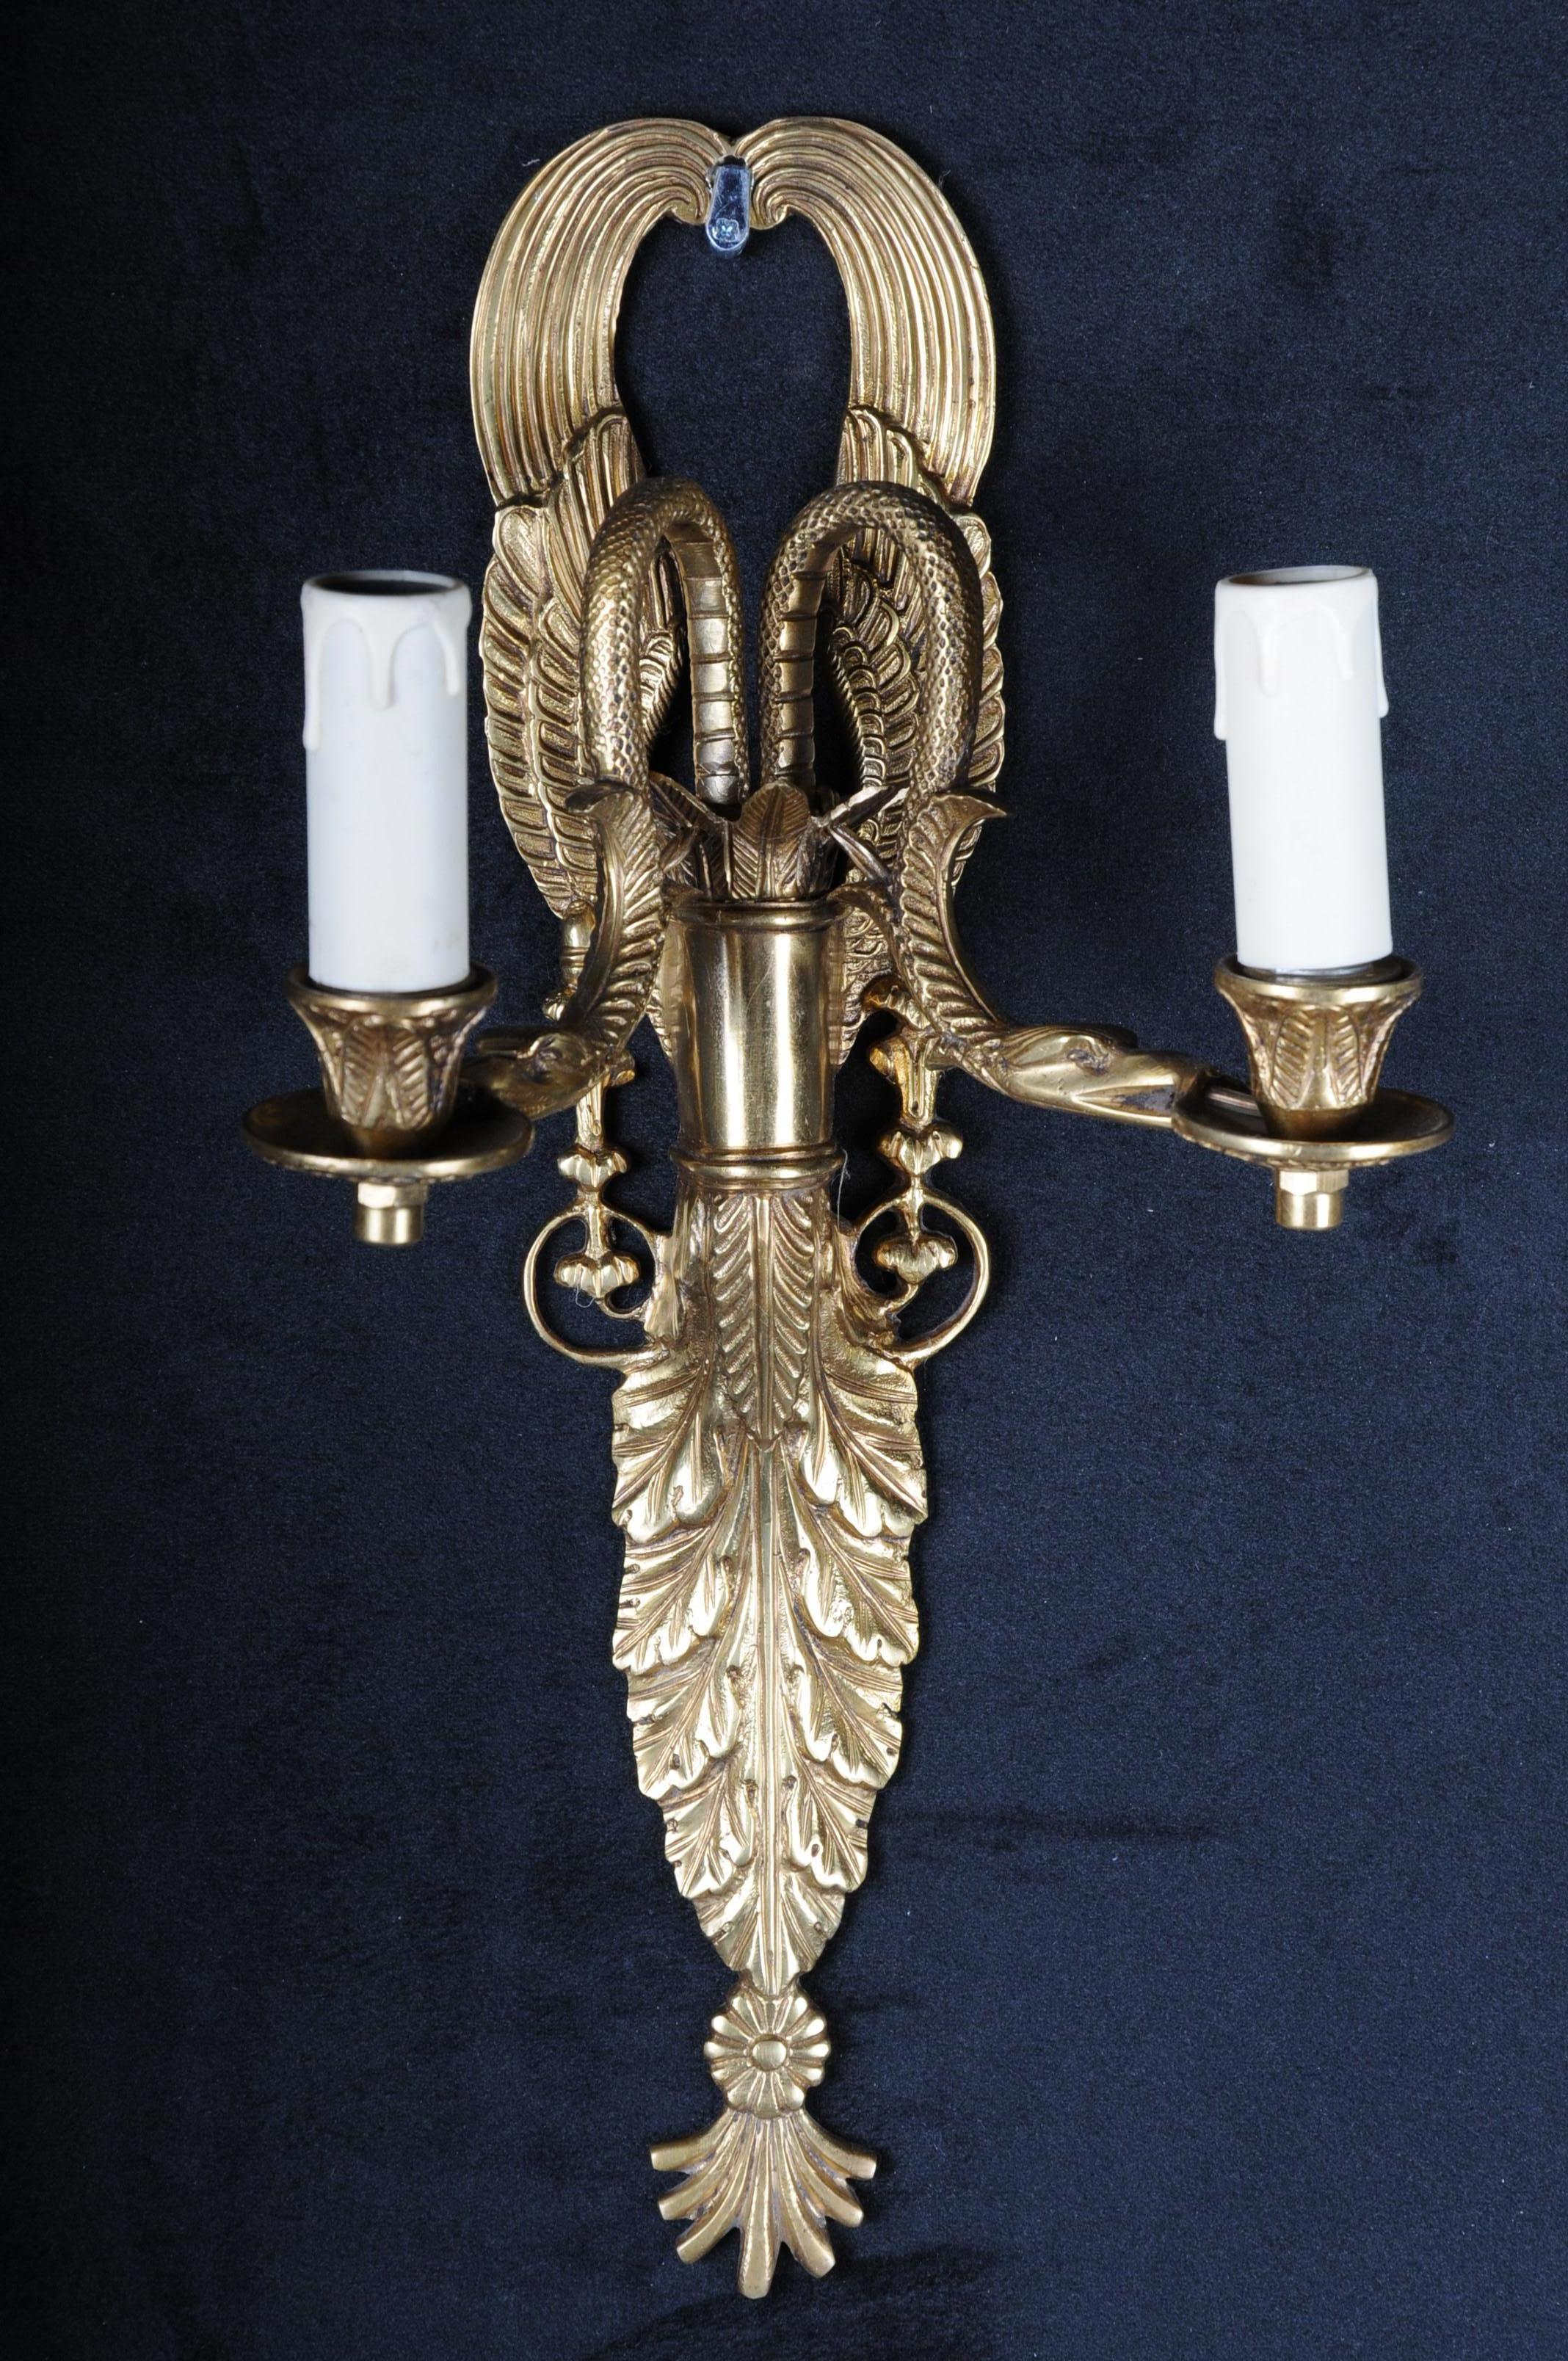 Pair of French bronze wall appliqués or sconces Empire style.

Bronze chased sconces. Spine shield starting from 2 designed as fully plastic snake’s lighthouses.

(F-Hud-24).